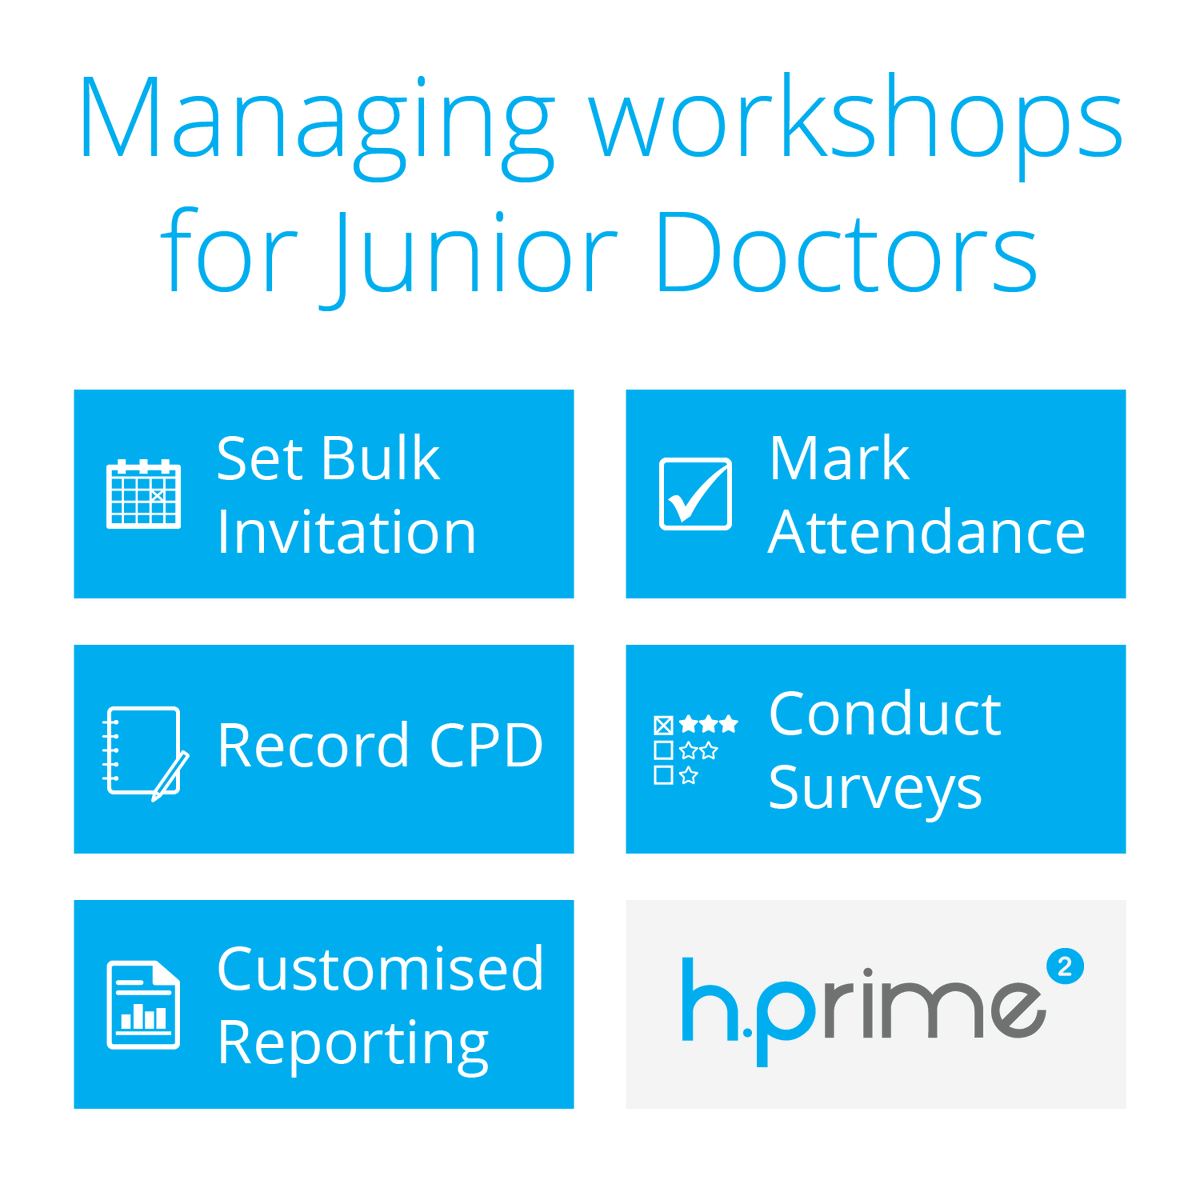 Simplify Med Ed workshops and events with H Prime 

#MedEd #MedTwitter #australiandoctors 
#aussiedoctors #juniordoctors #teachinghospitals #hprime